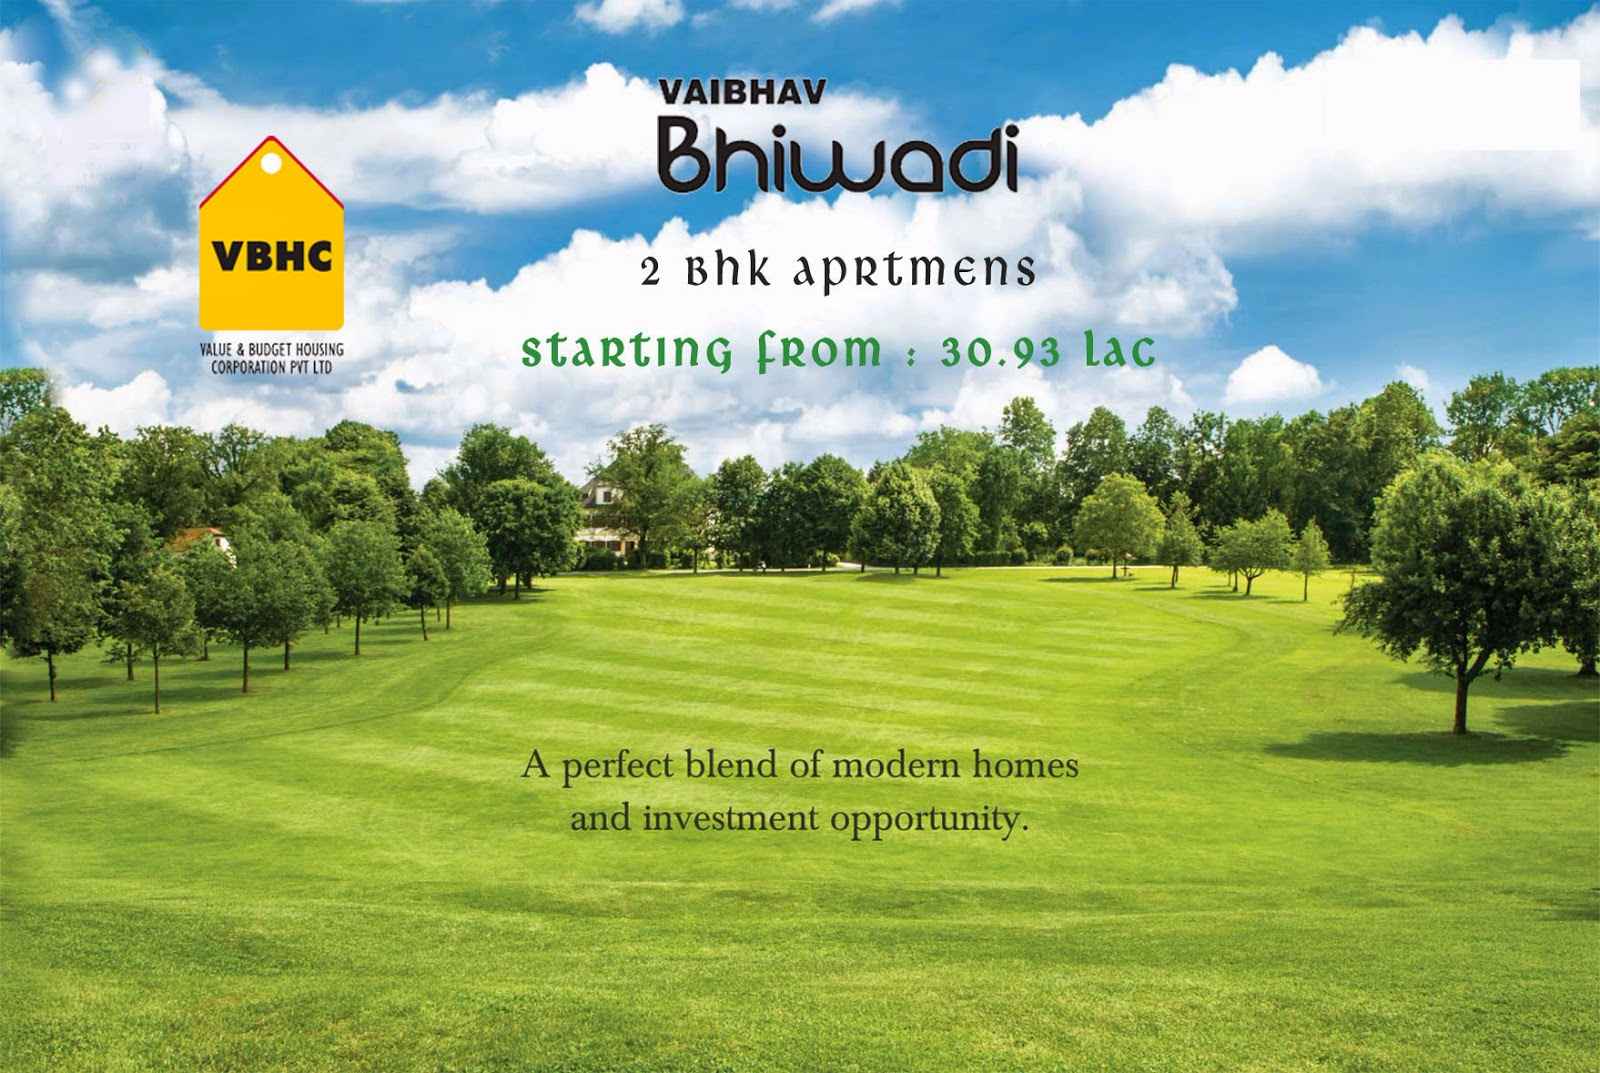 VBHC Vaibhav Bhiwadi is a complete blend of modern homes and investment opportunity